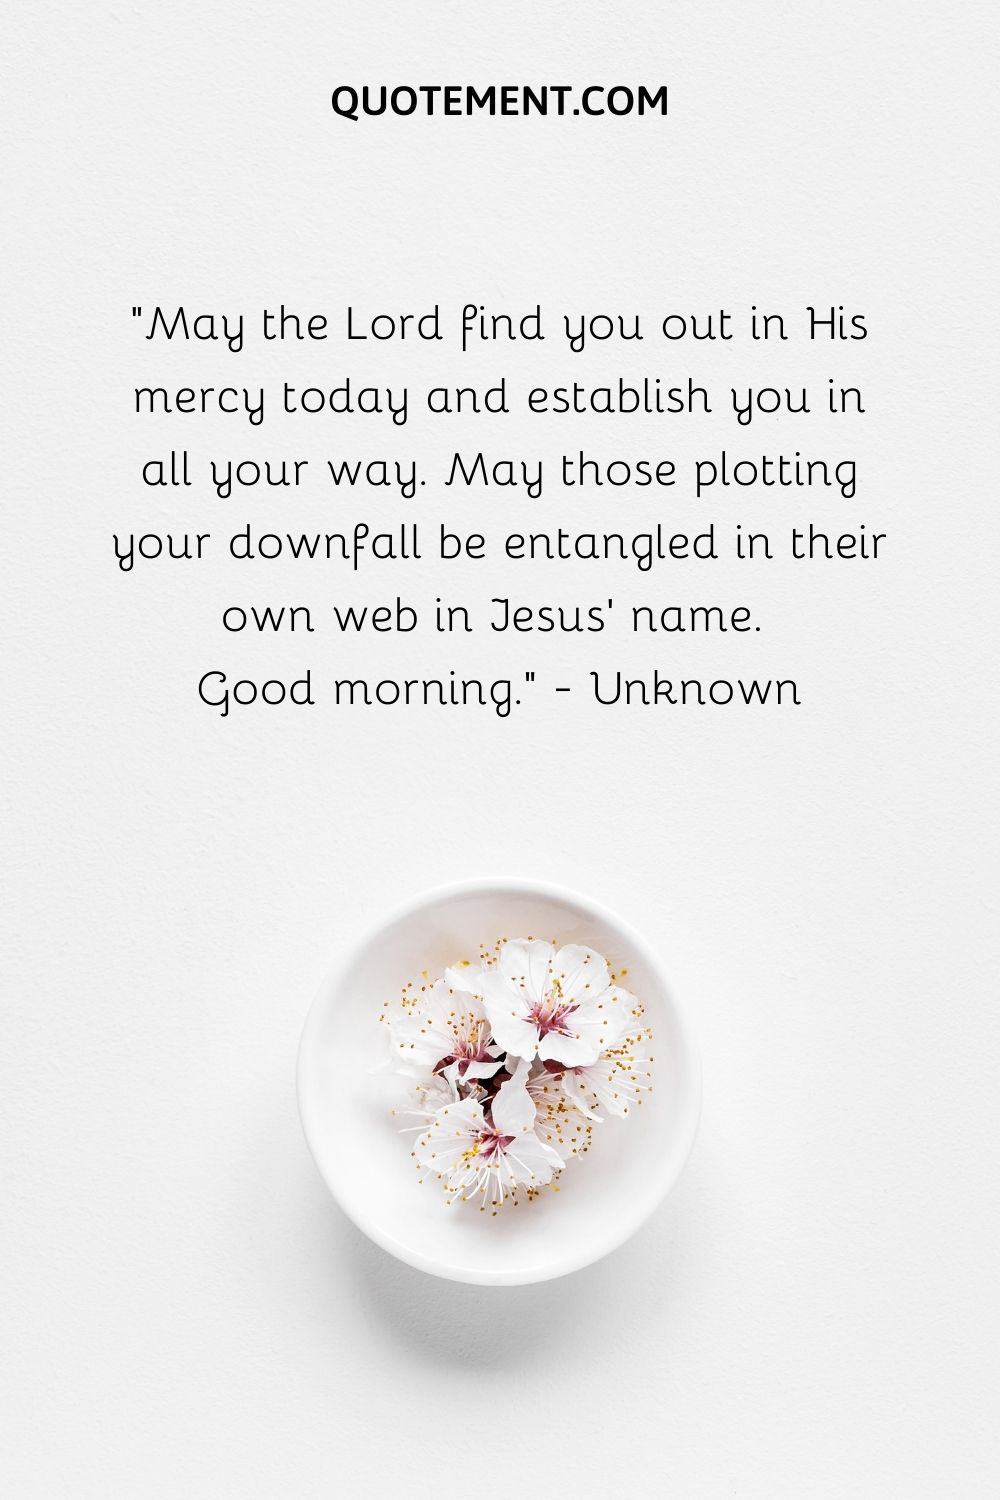 May the Lord find you out in His mercy today and establish you in all your way